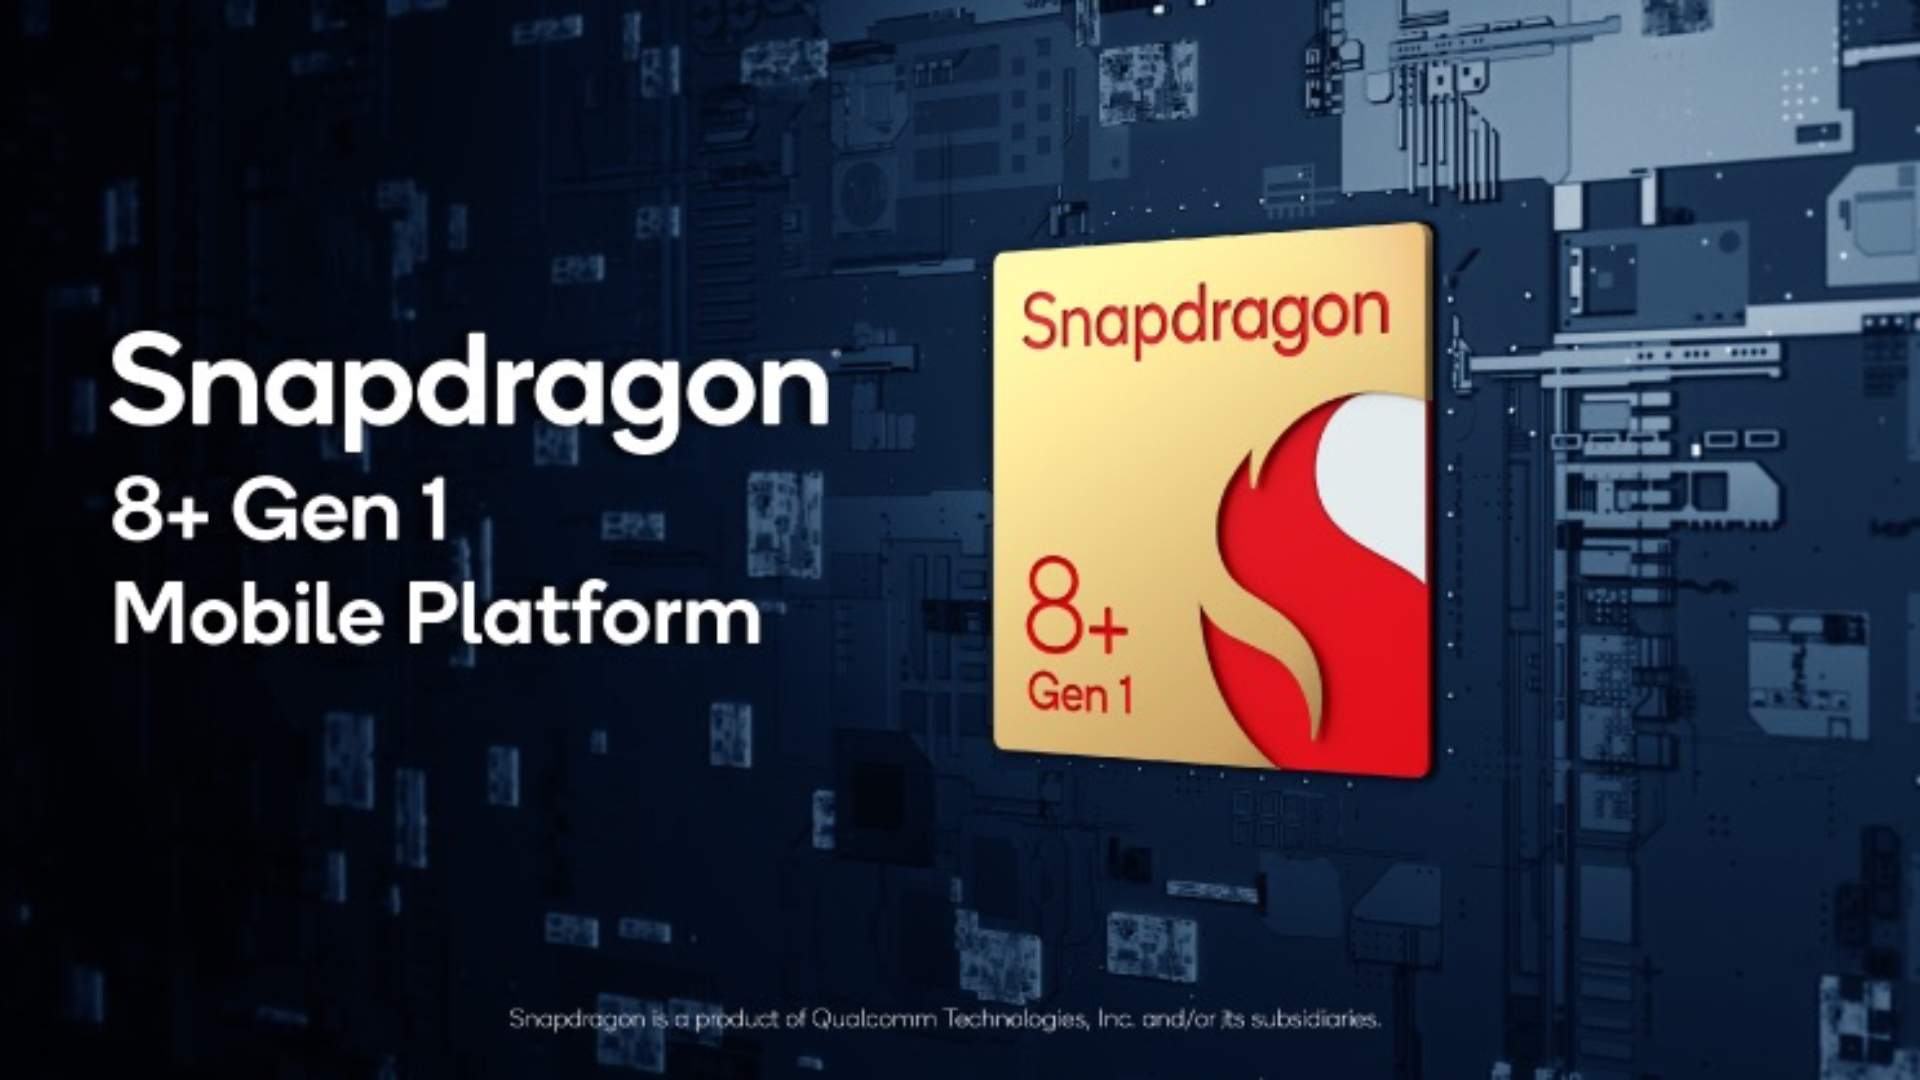 Qualcomm Snapdragon 8+ Gen 1 processor announced with higher power efficiency - SamMobile